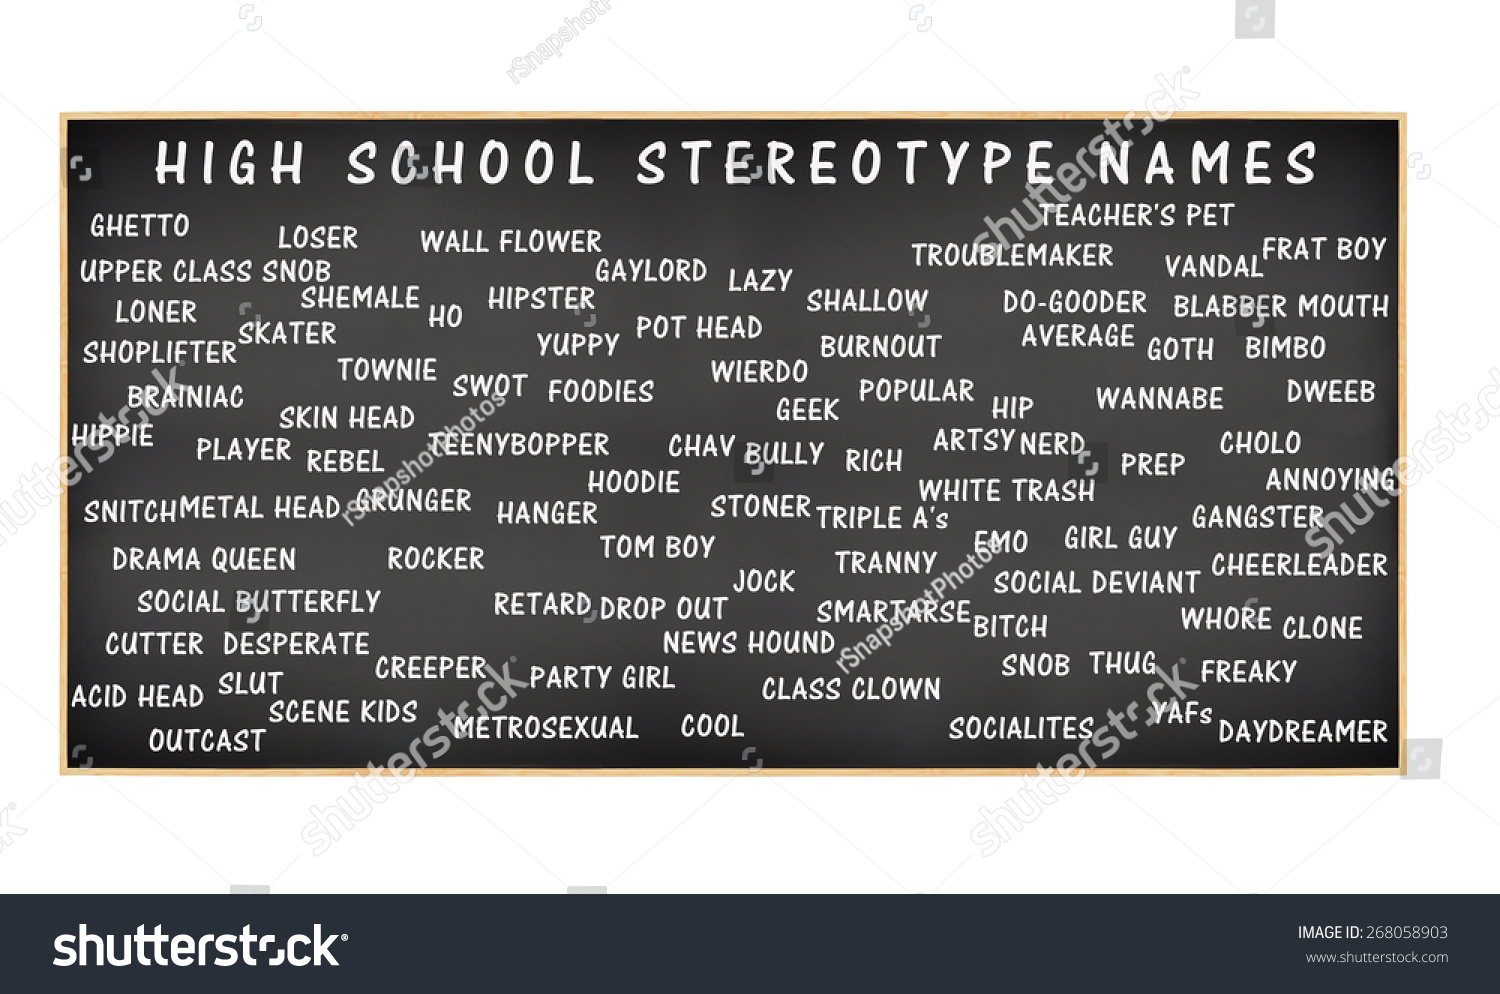 School stereotypes high What High